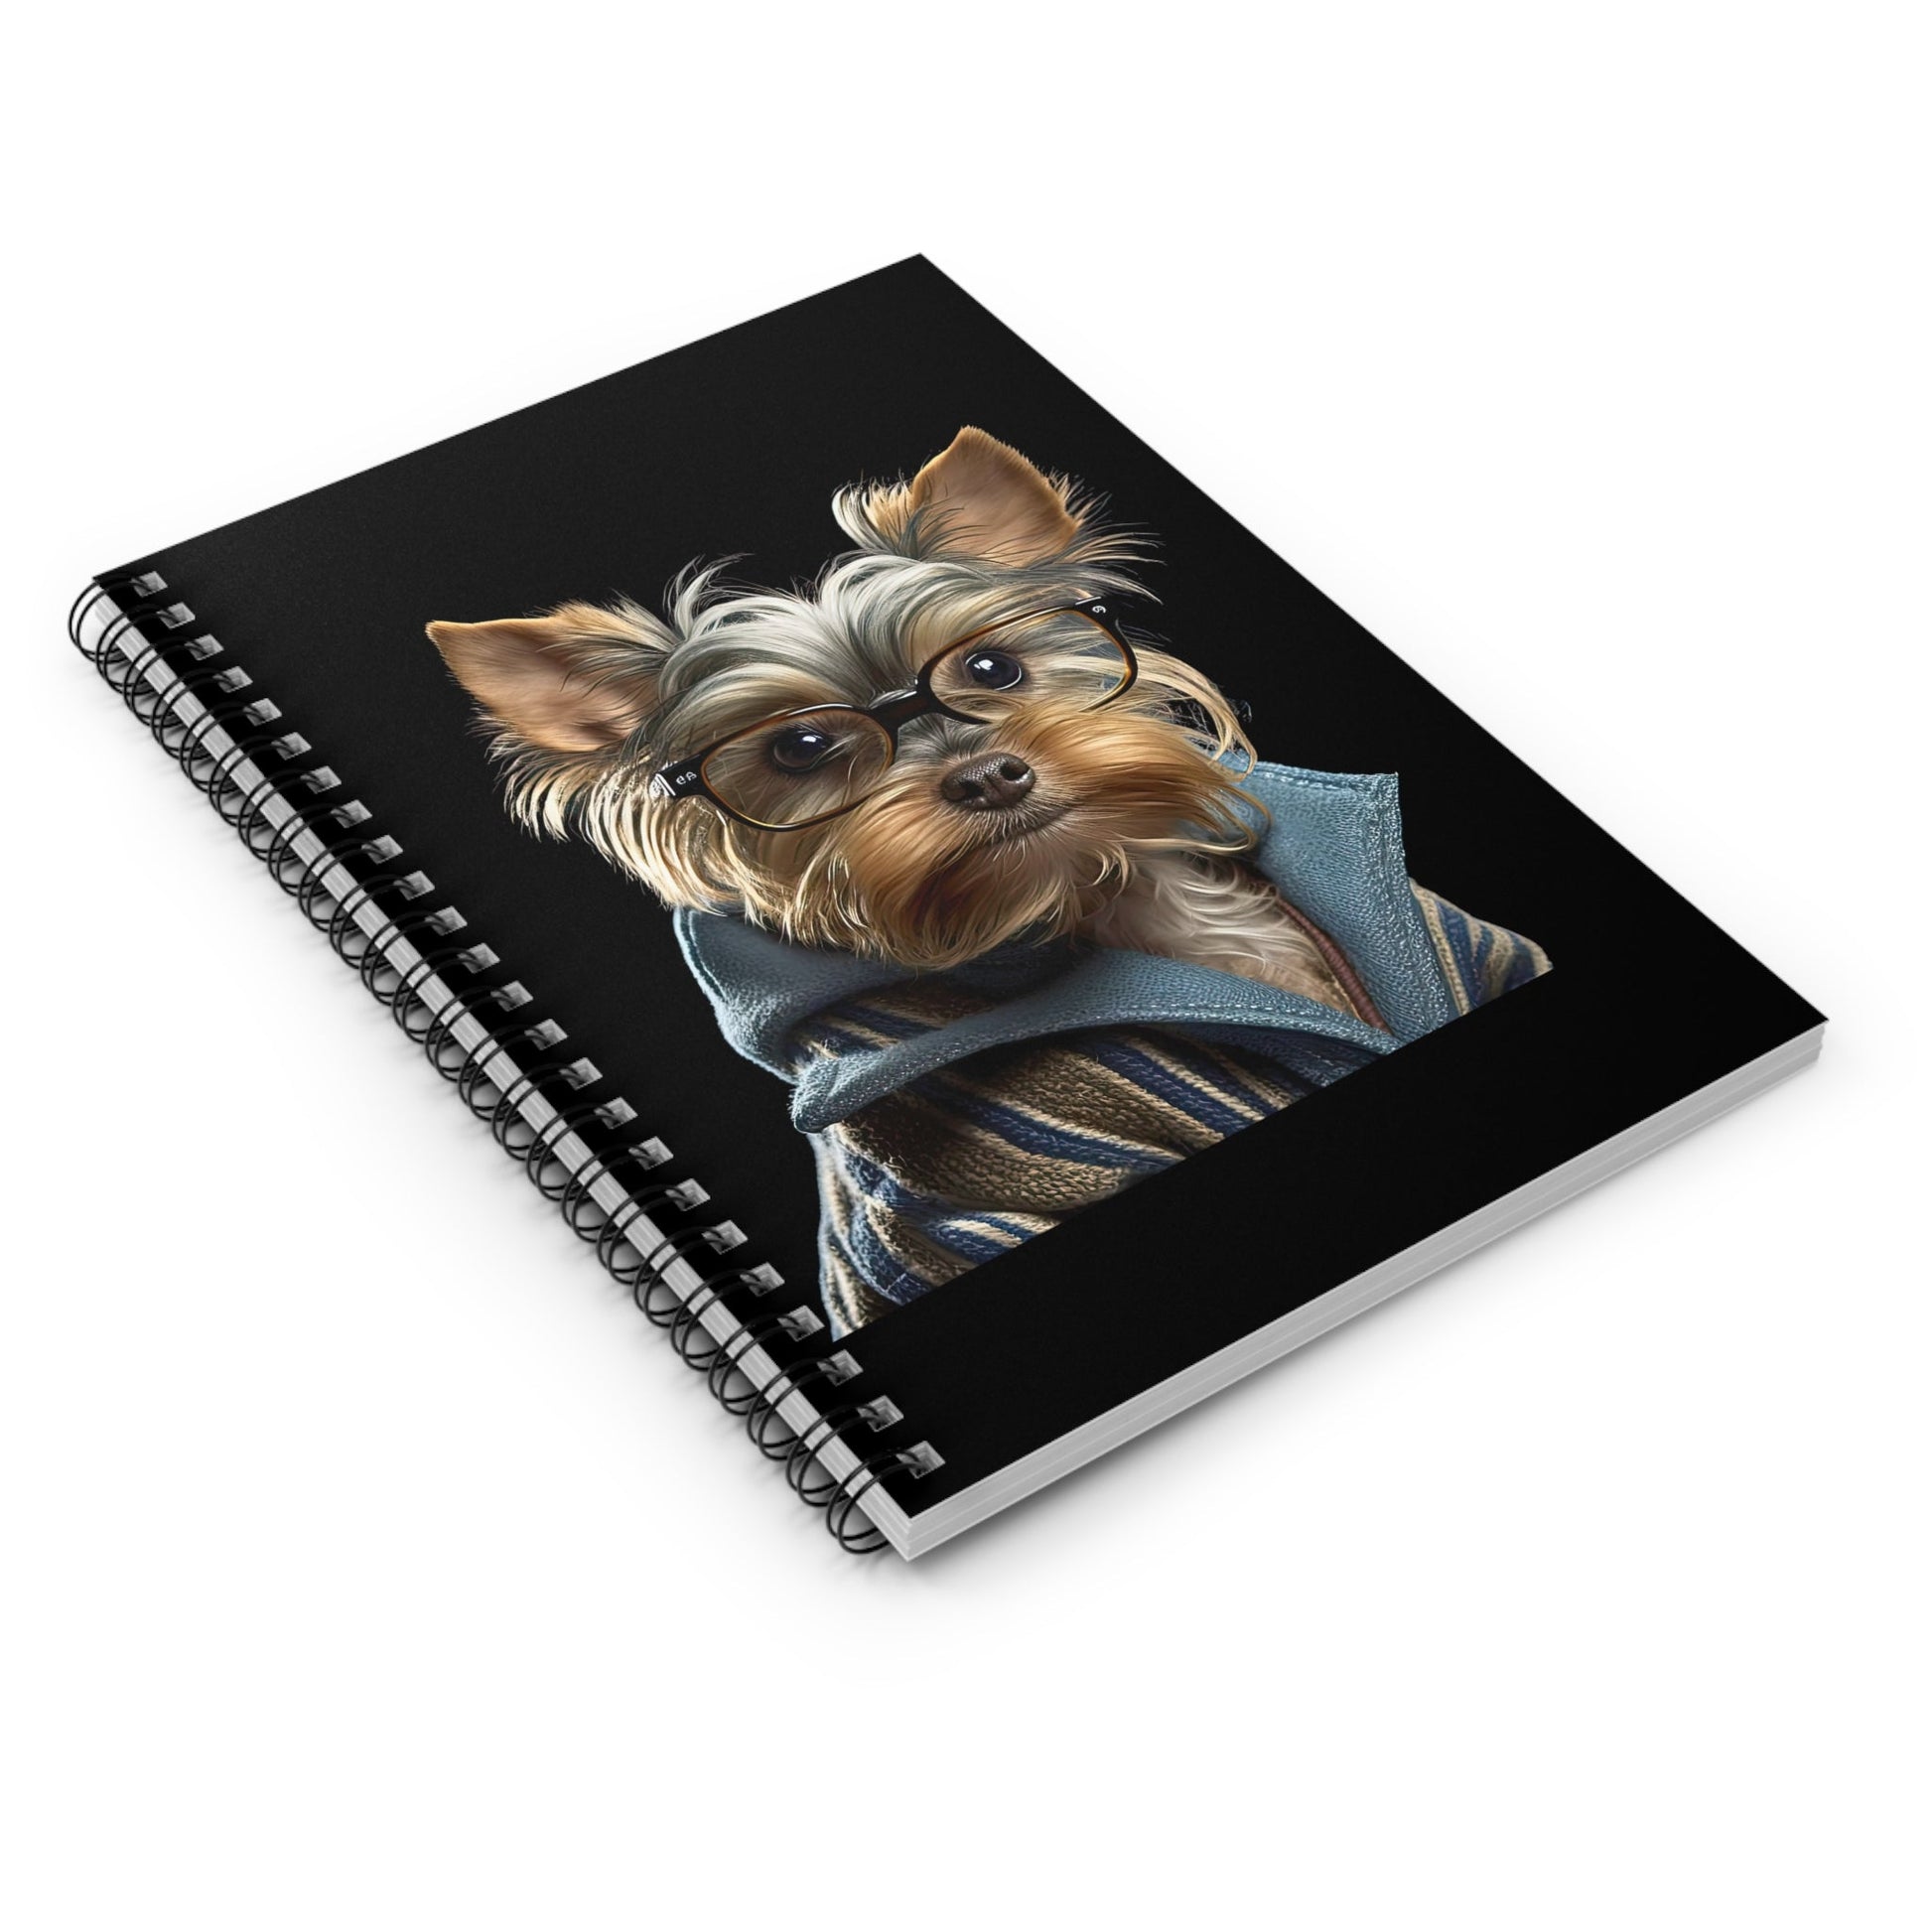 YETTIE : Spiral Notebook - Ruled Line - Shaggy Chic